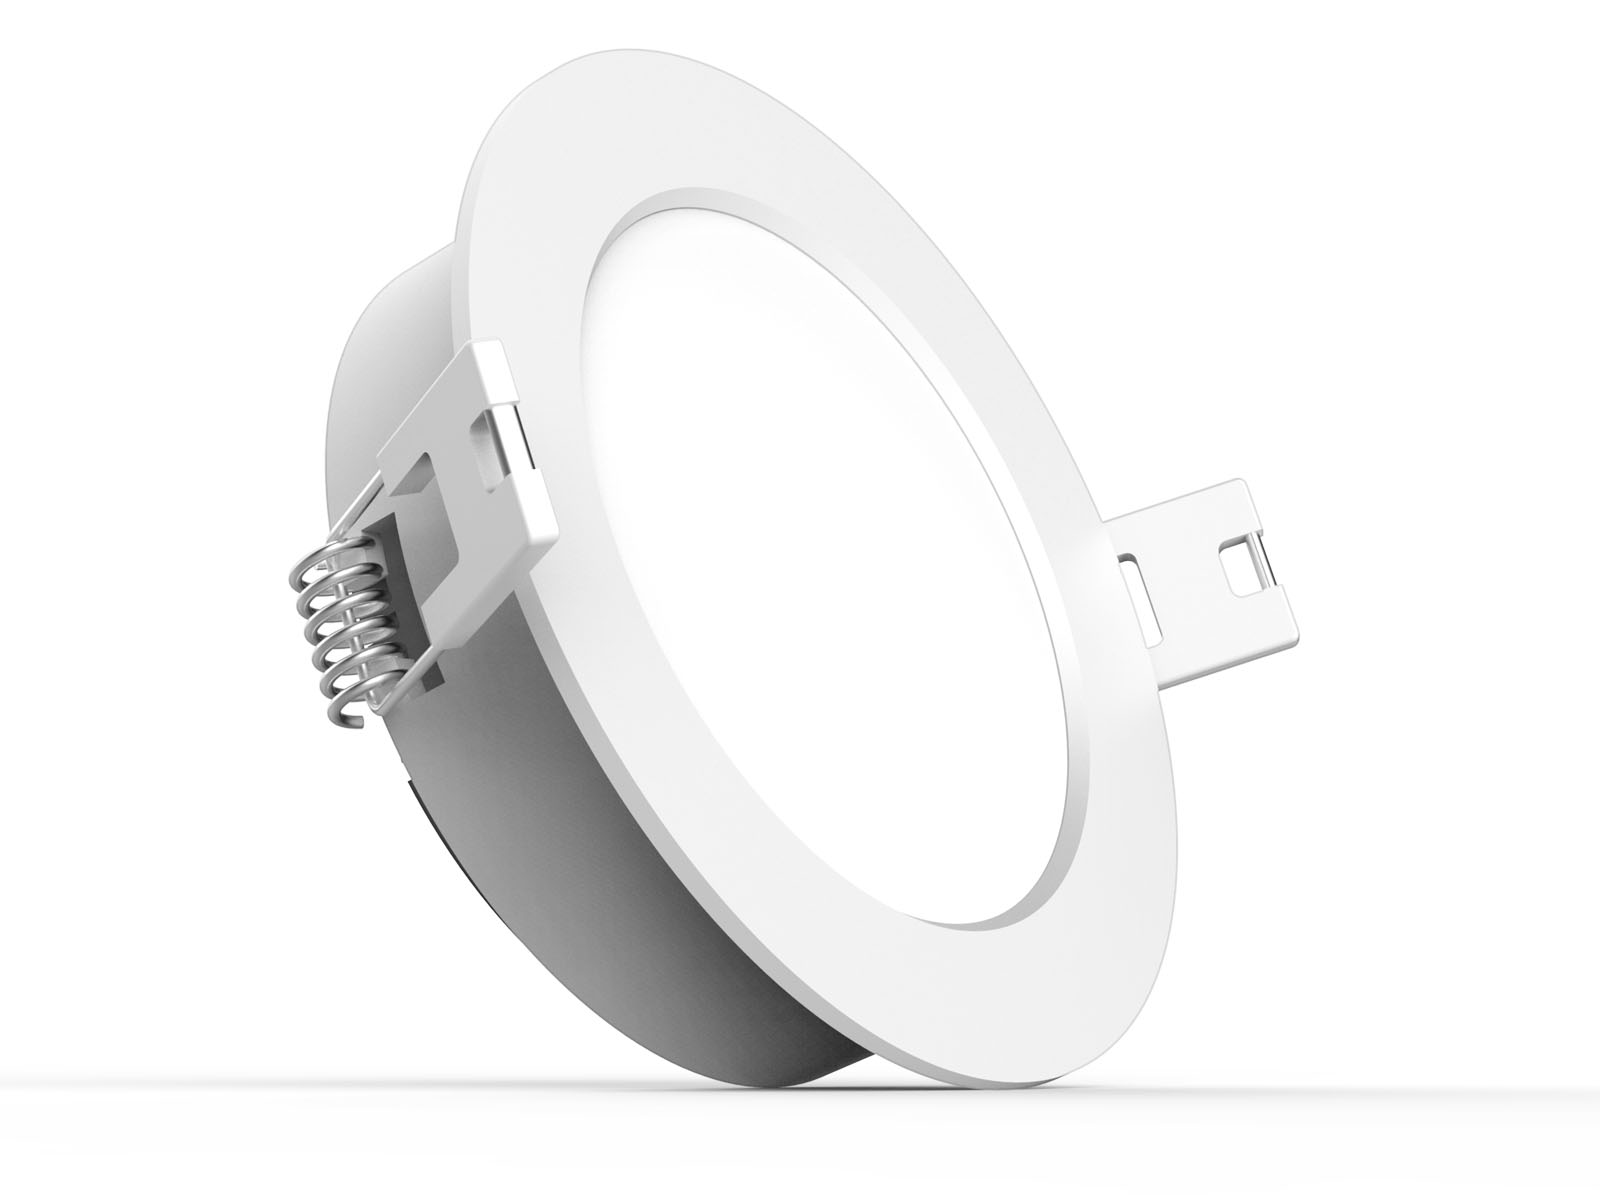 DL62 1 SMD LED Downlight with dimmer